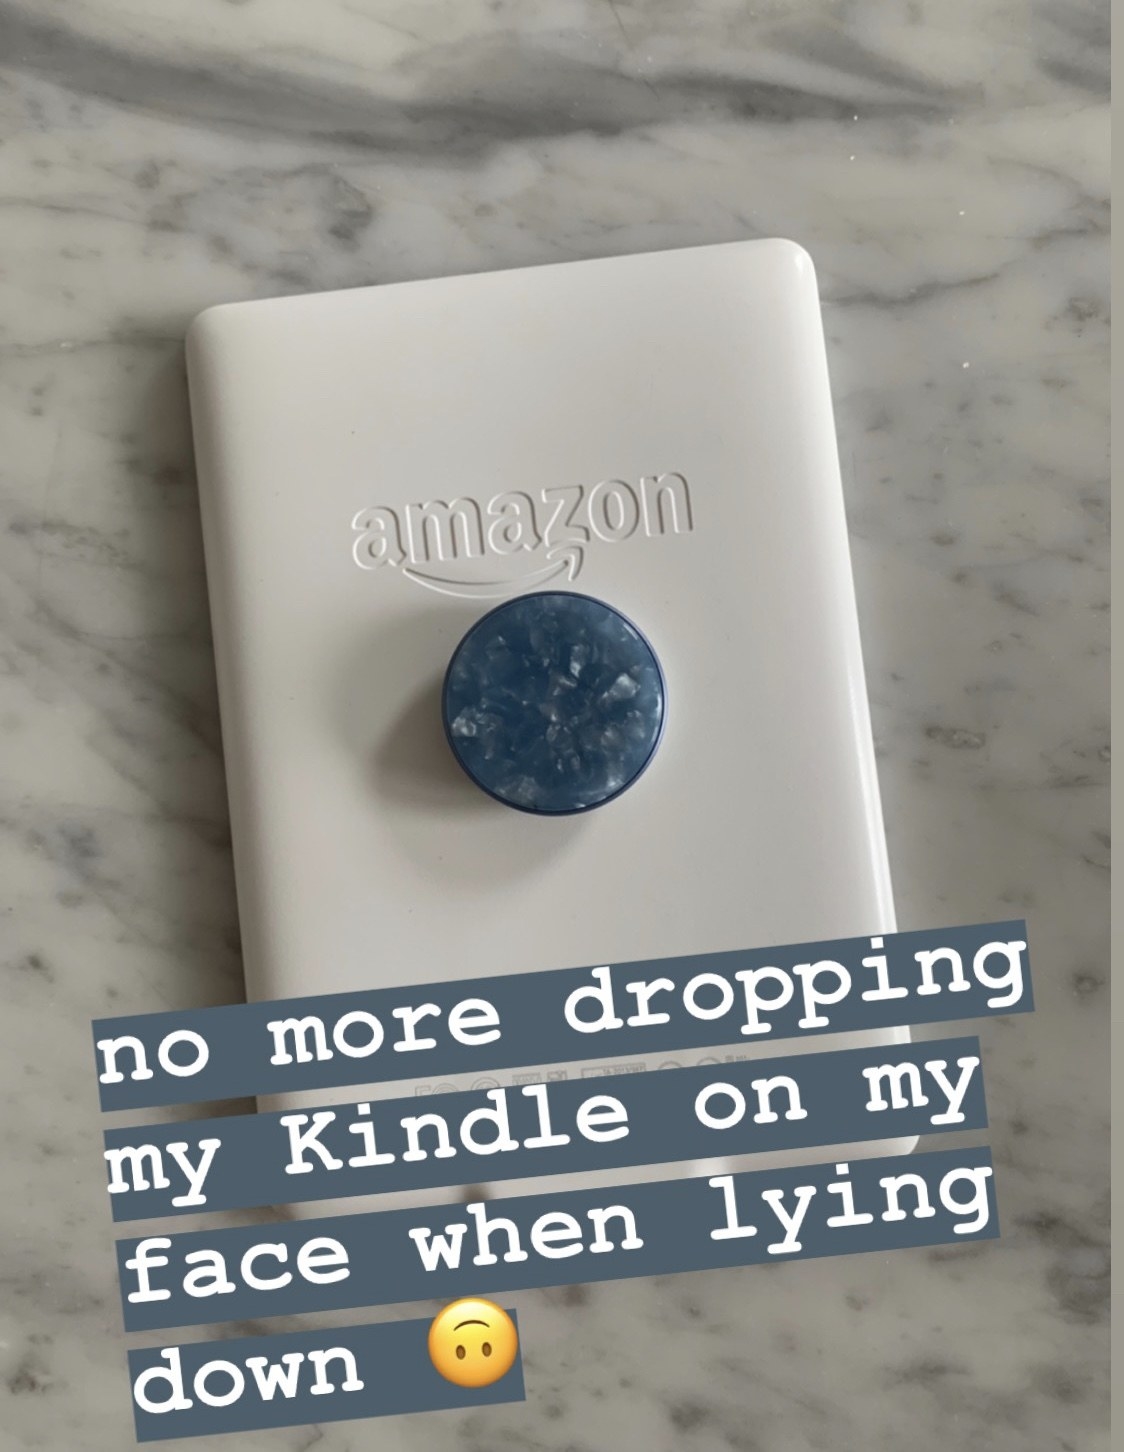 A white kindle with a blue acetate popsocket, with the text &quot;no more dropping my Kindle on my face when lying down&quot;